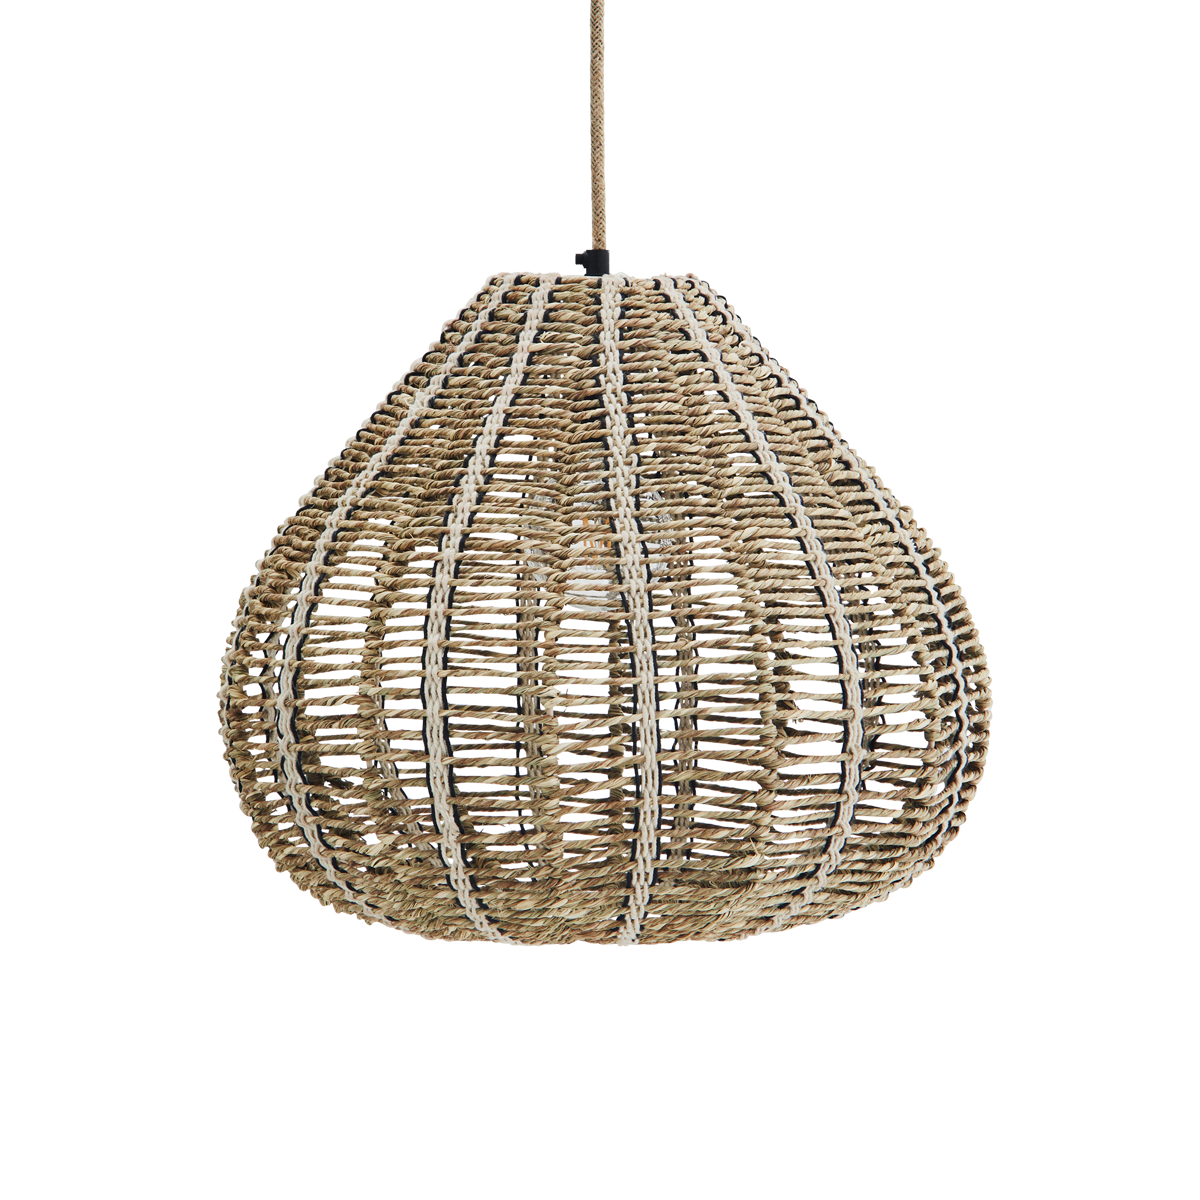 Seagrass ceiling lamp